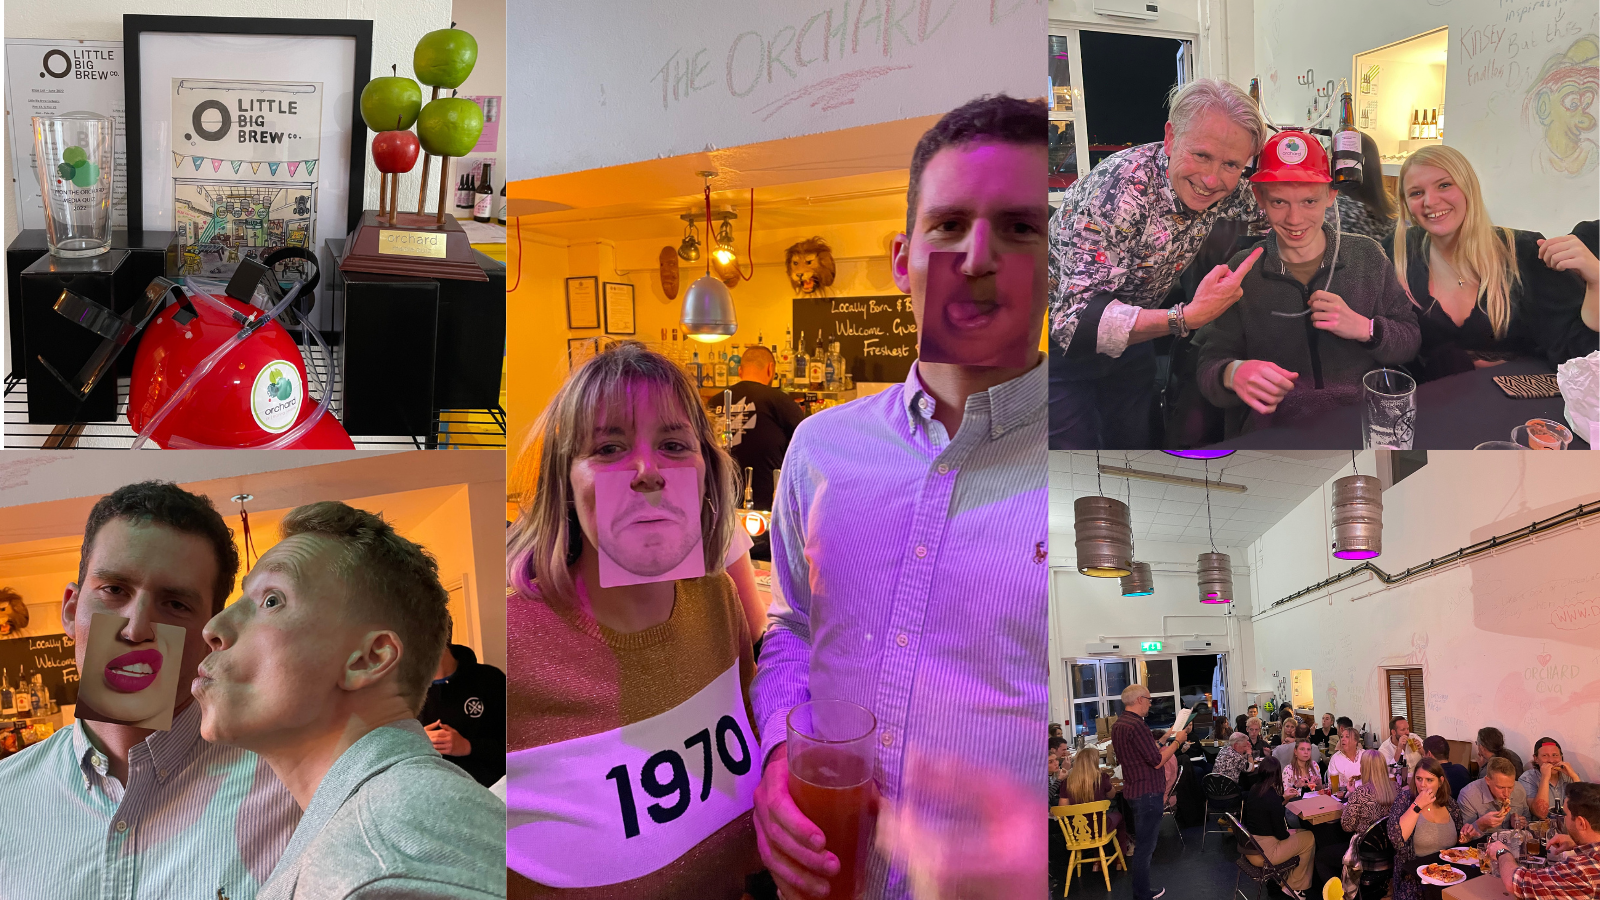 Photos from the media quiz